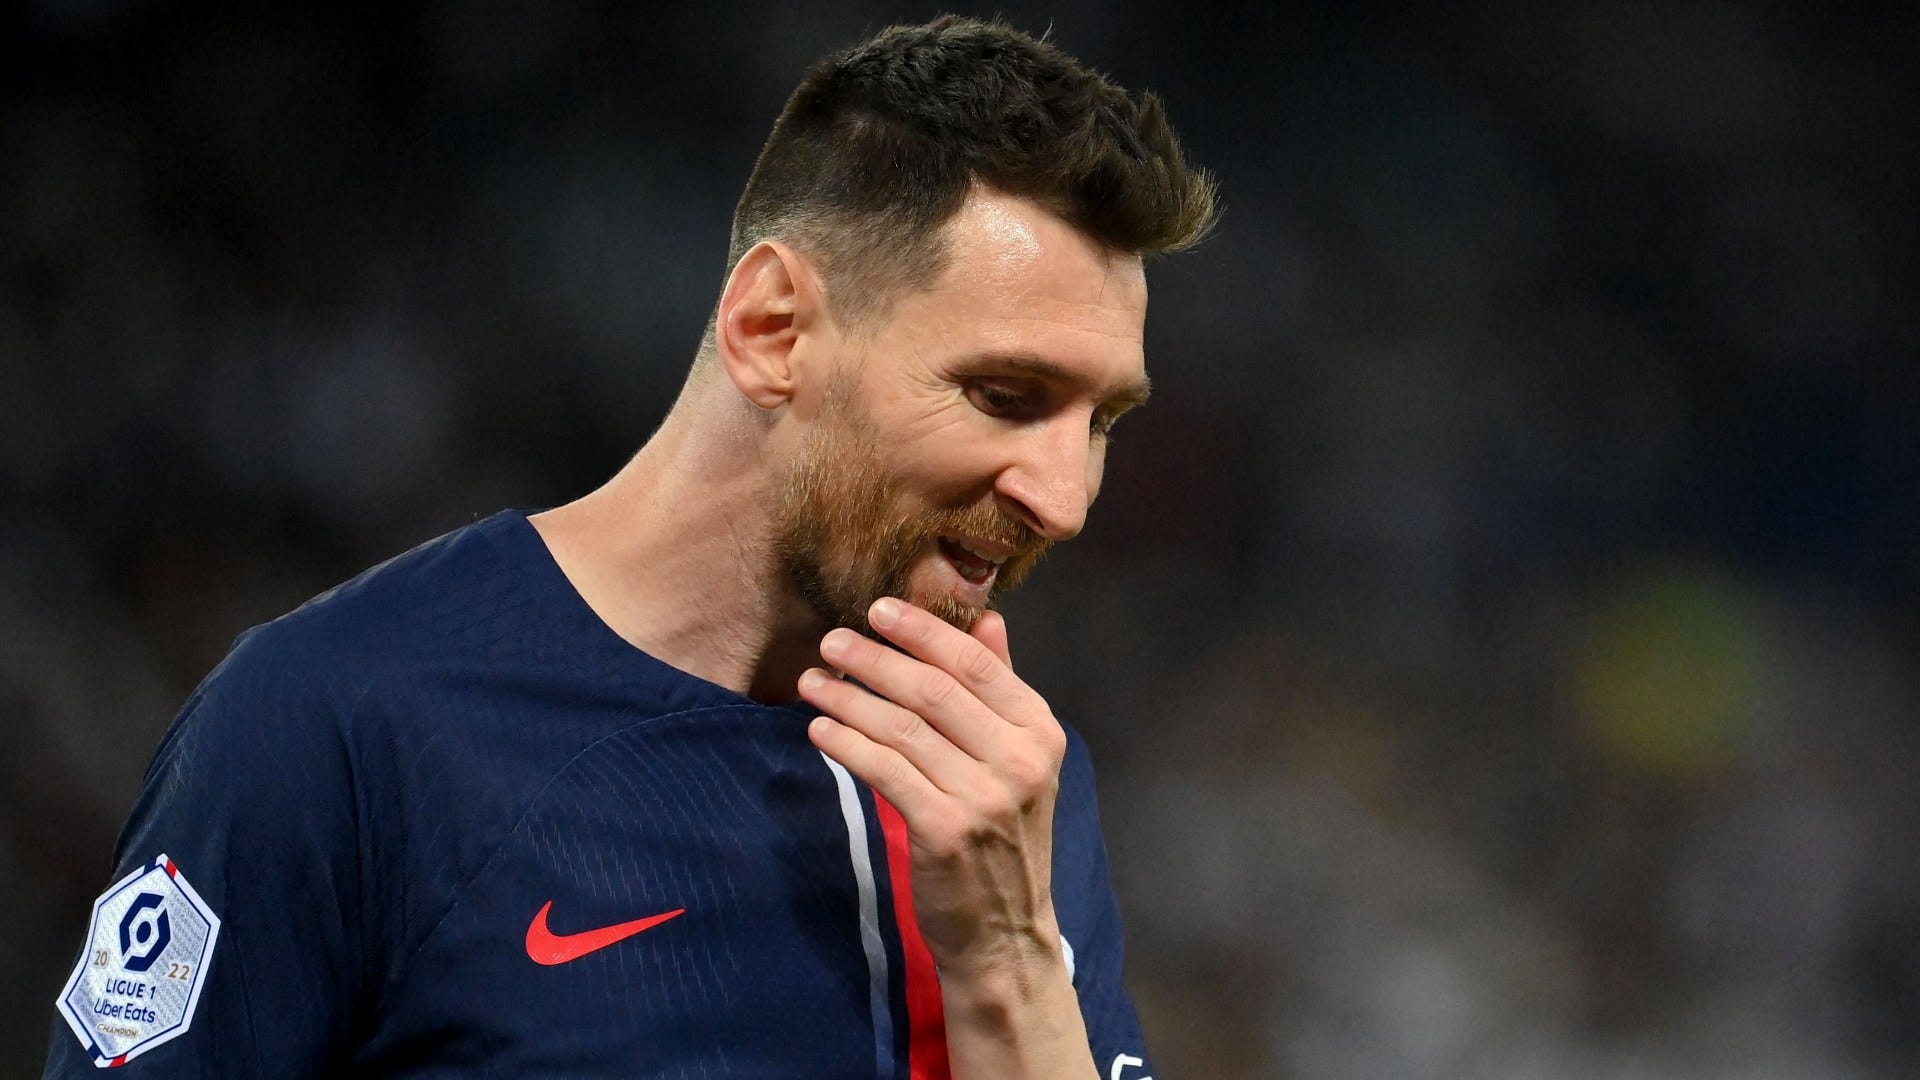 PSG player ratings vs Clermont Foot: Lionel Messi's miserable final appearance sums up his underwhelming Ligue 1 career